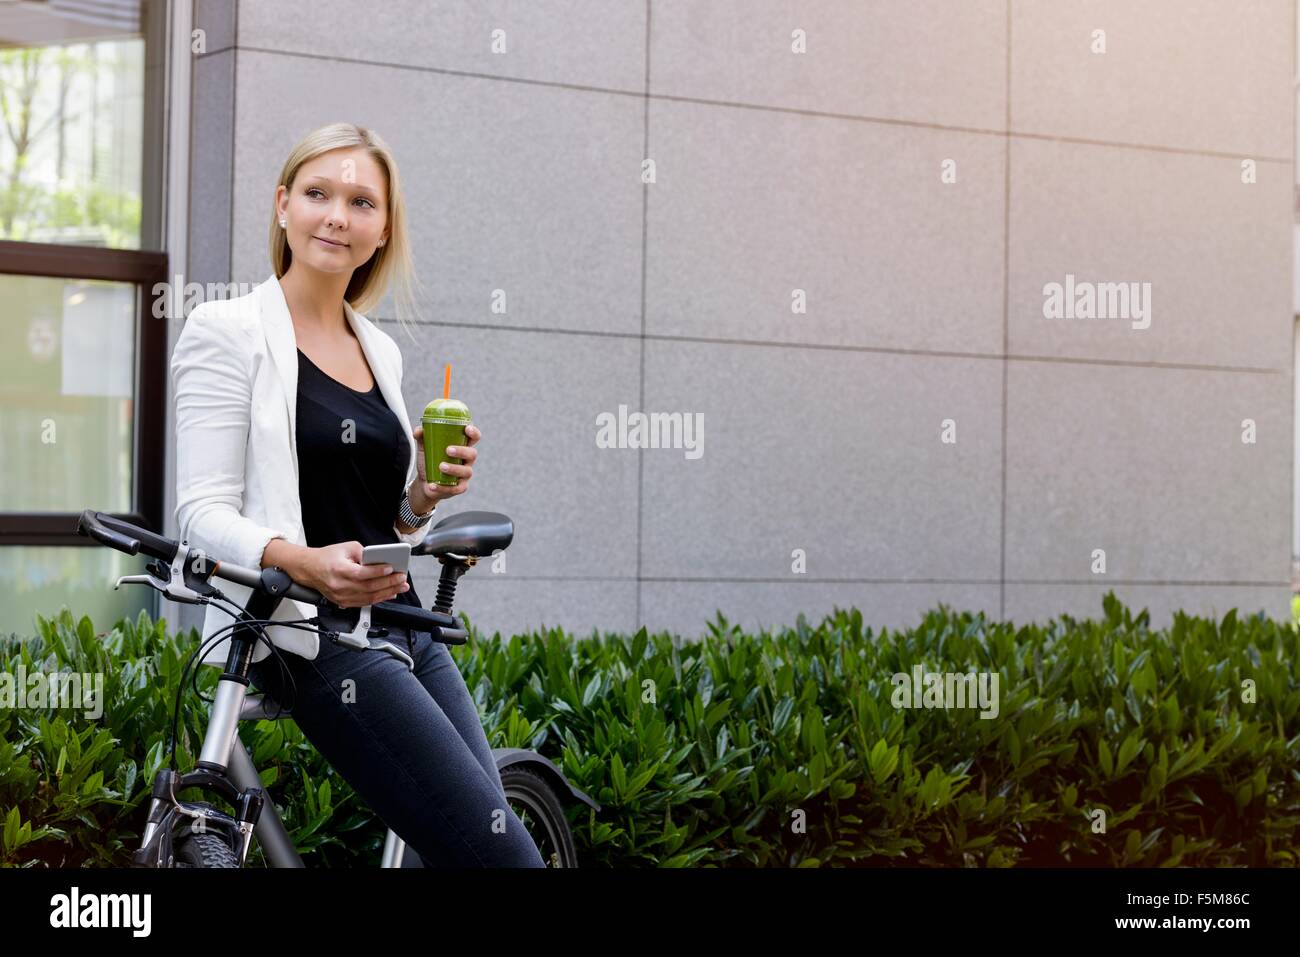 Young woman leaning against bicycle using smartphone Stock Photo